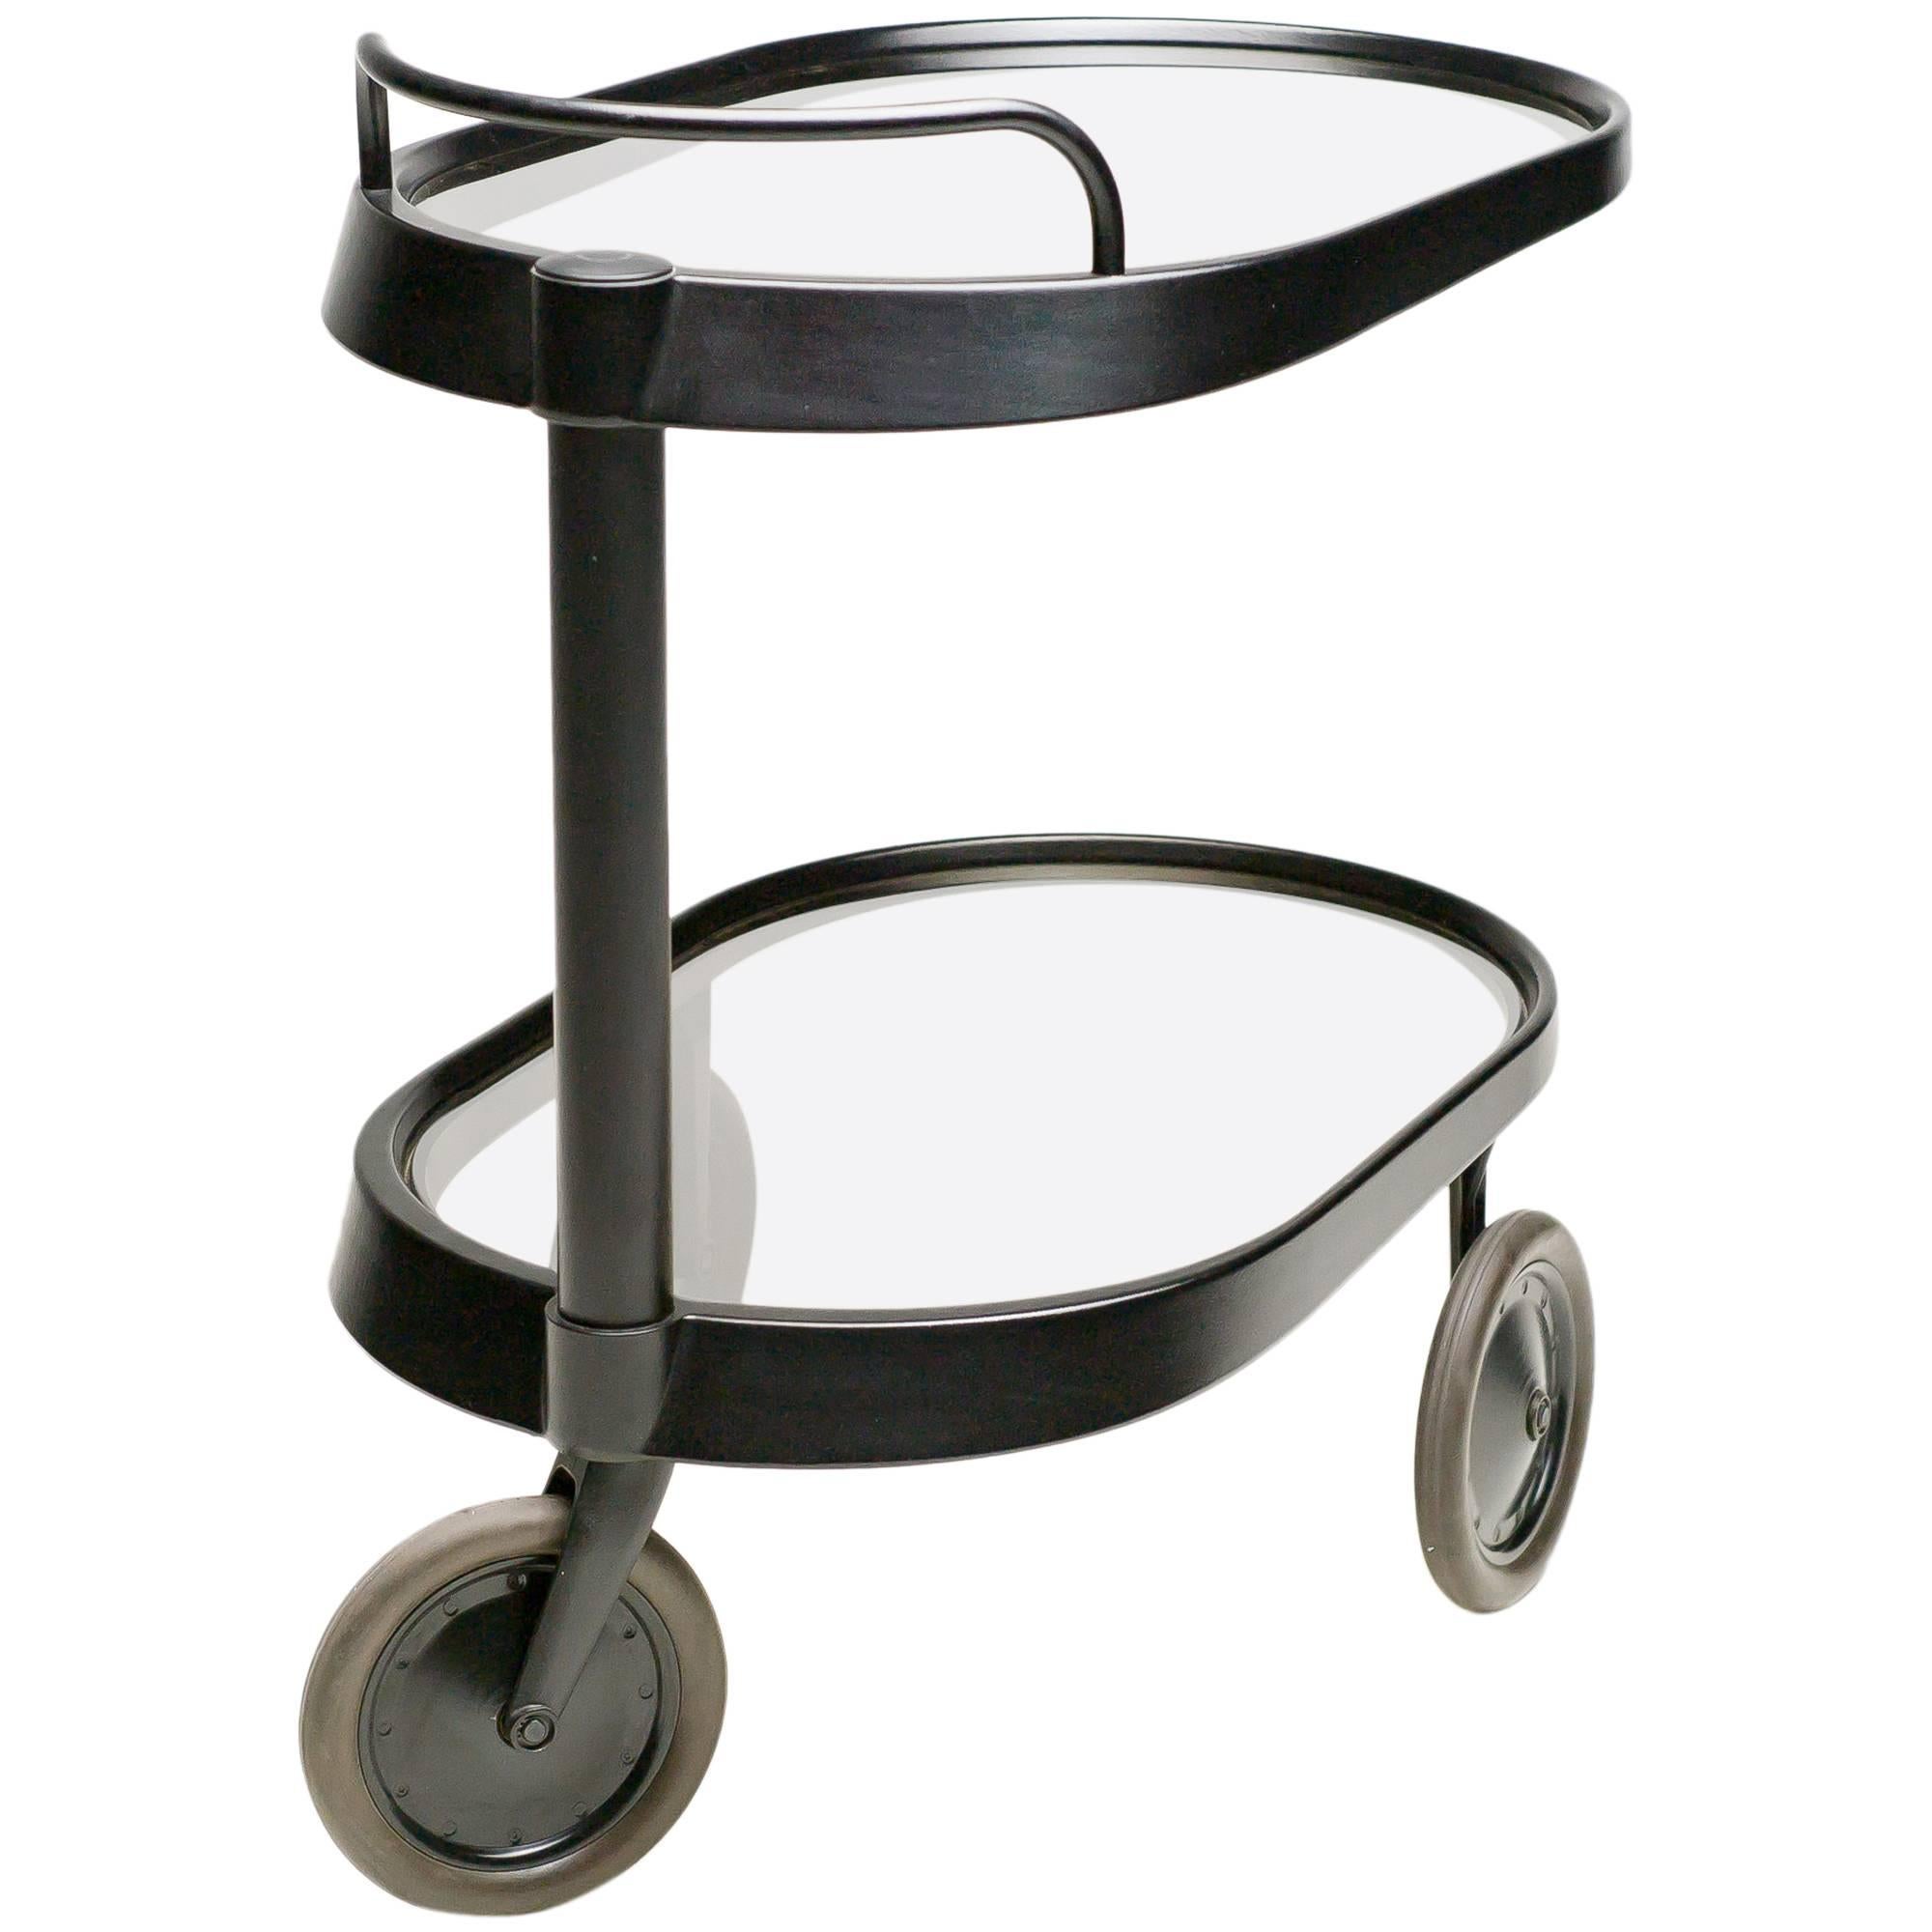 Modern Trolley Designed by Enzo Mari for Alessi in 1989